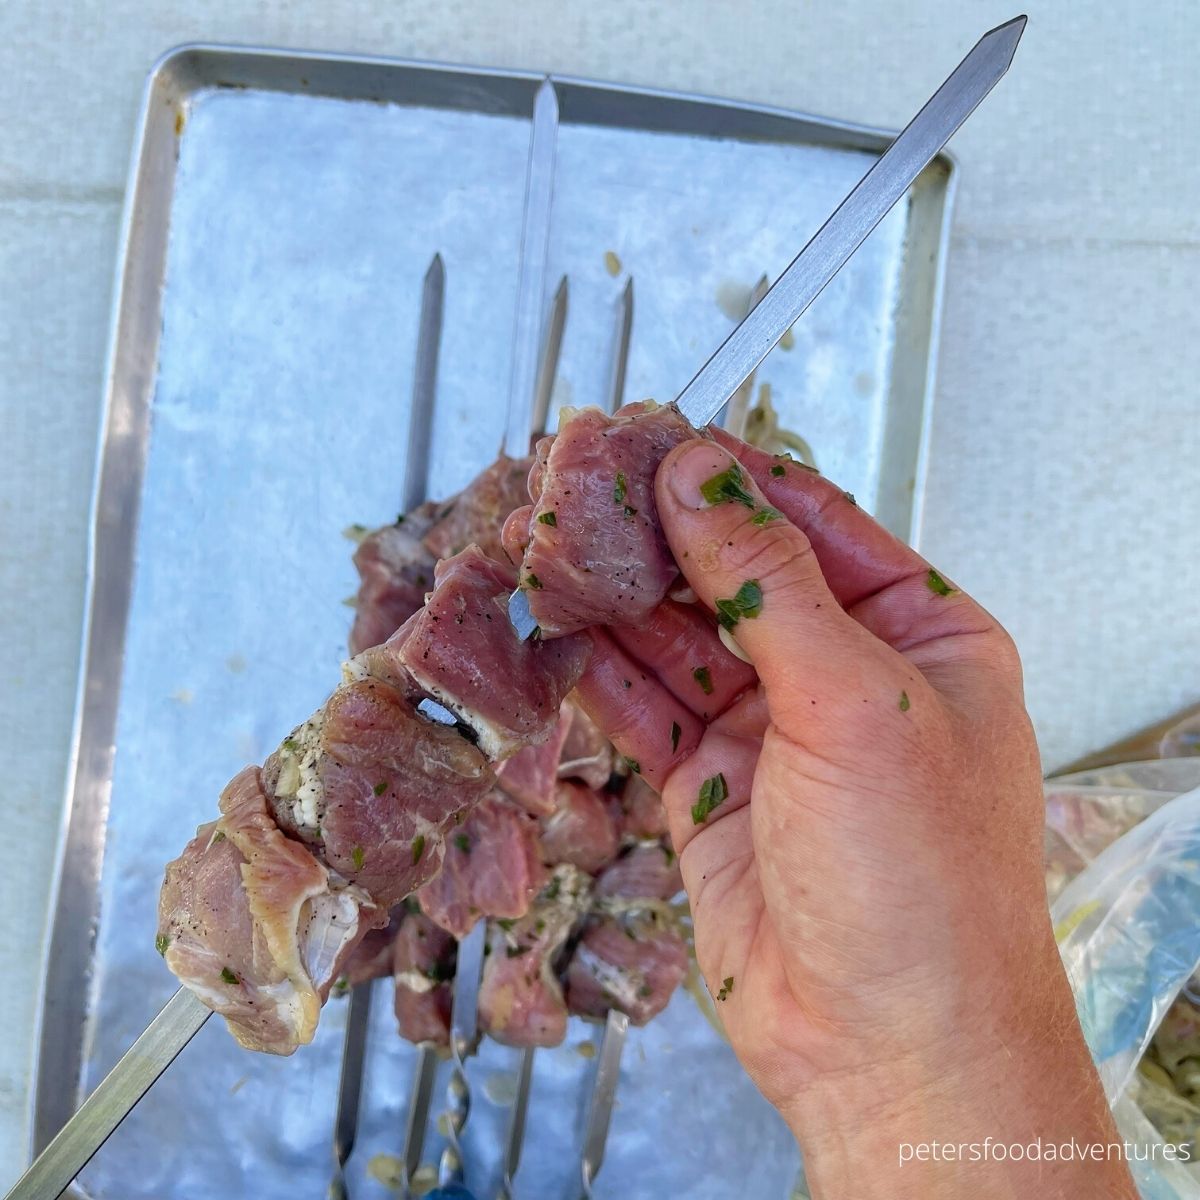 threading skewers with meat